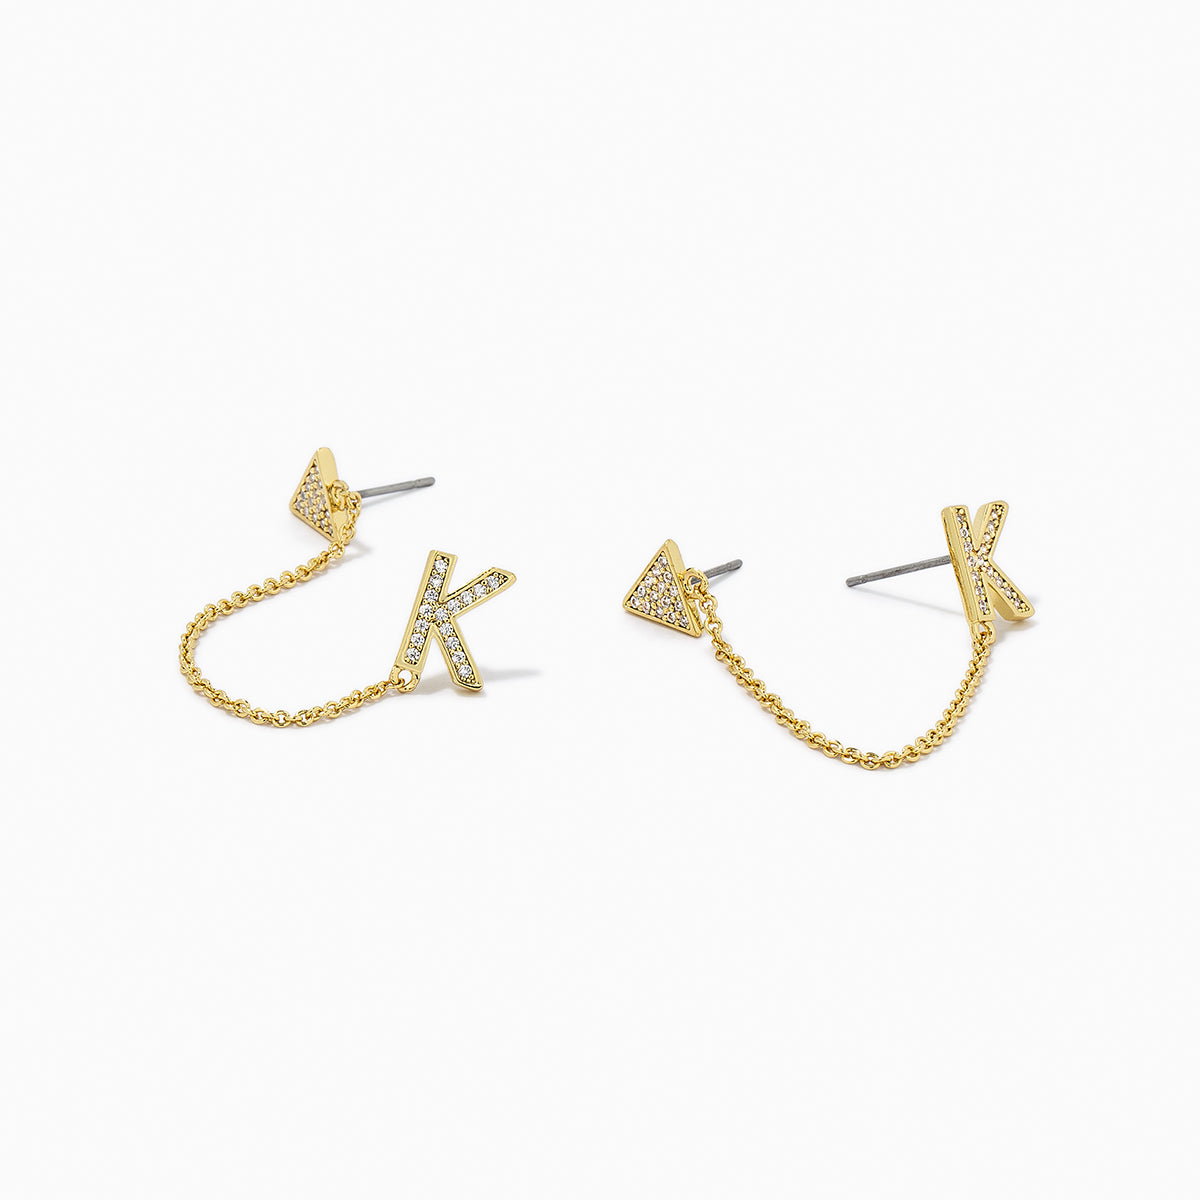 Initial Ear Climber | Gold A Gold B Gold C Gold D Gold E Gold H Gold J Gold K Gold L Gold M Gold N Gold R Gold S Gold T | Product Detail Image | Uncommon James